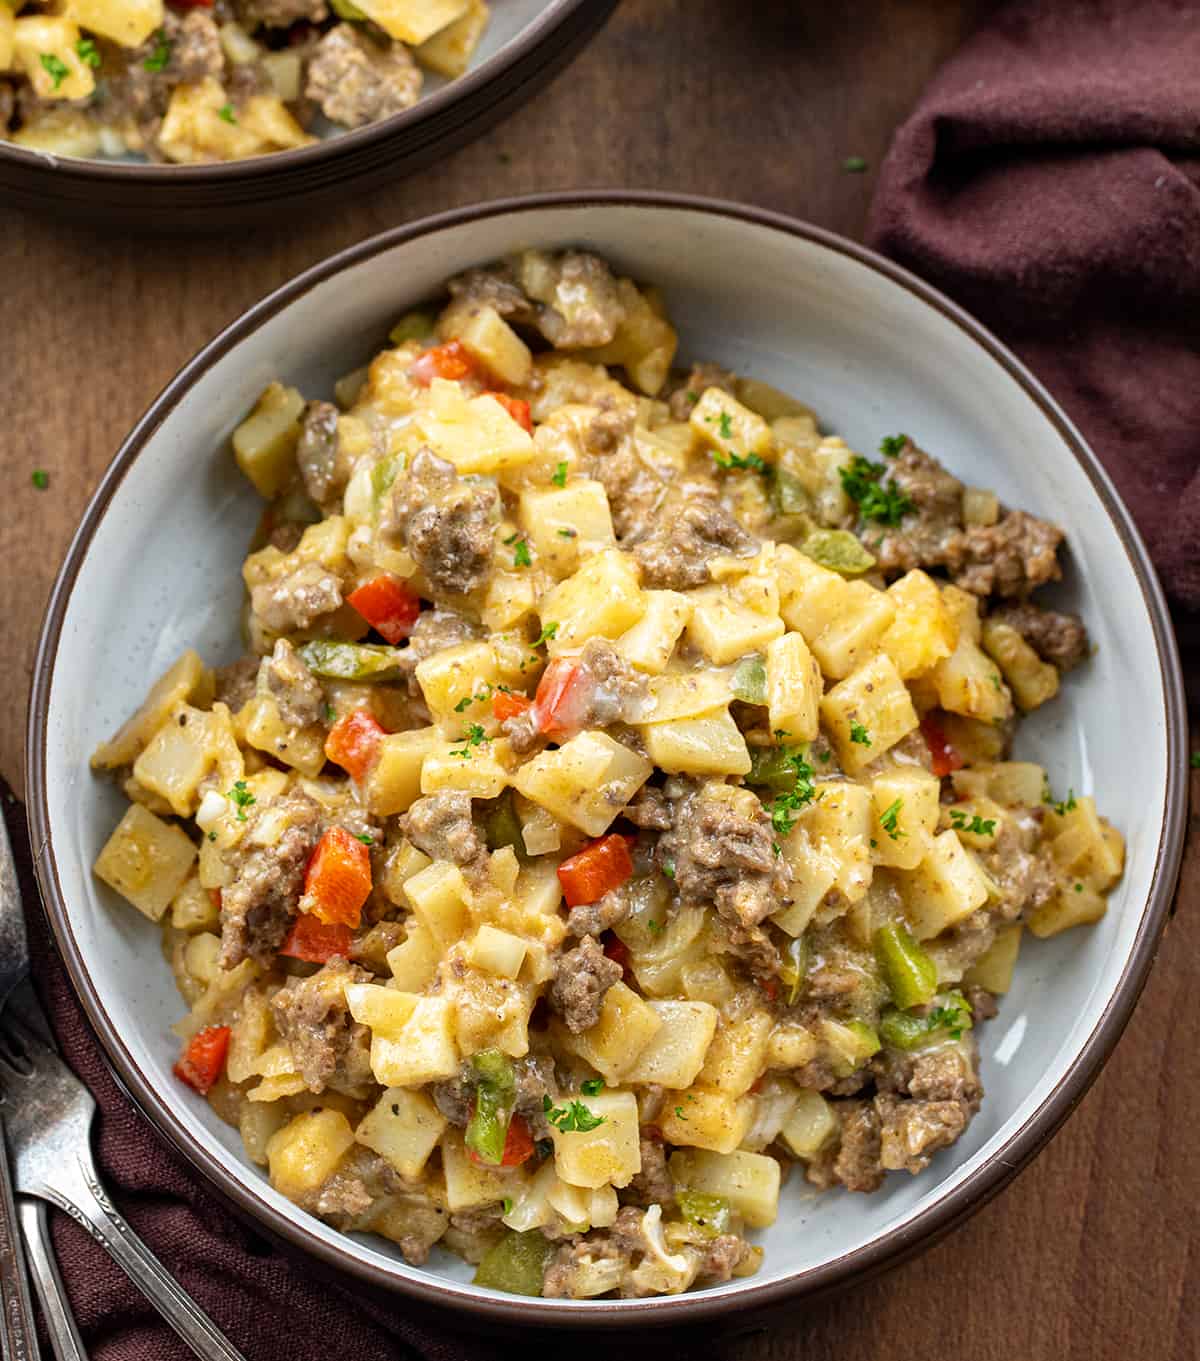 Bowls of Slow Cooker Philly Cheesesteak Casserole on a wooden table. 